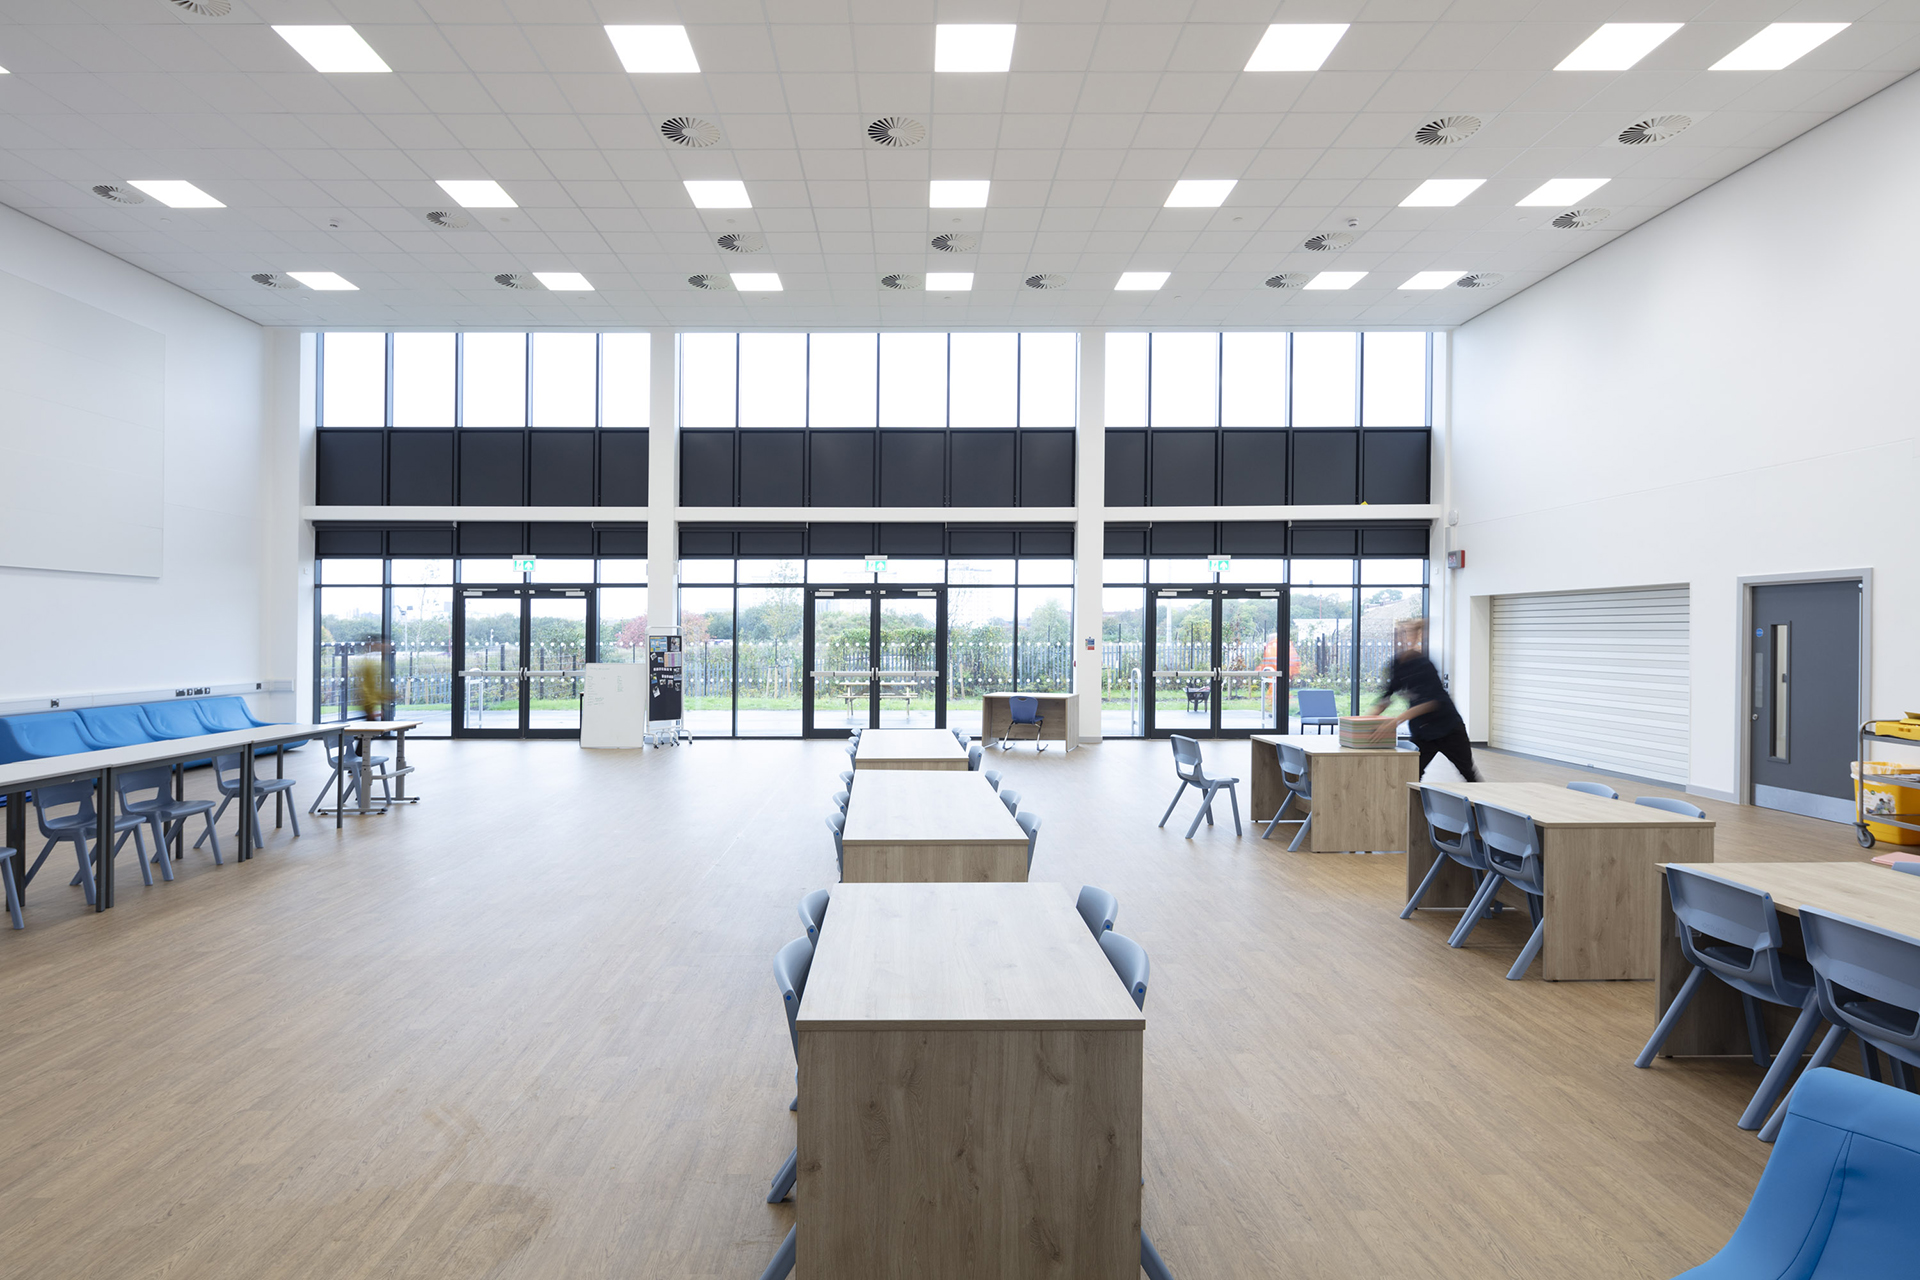 Open-plan canteen with desks and chairs and three double glass doors leading to outside